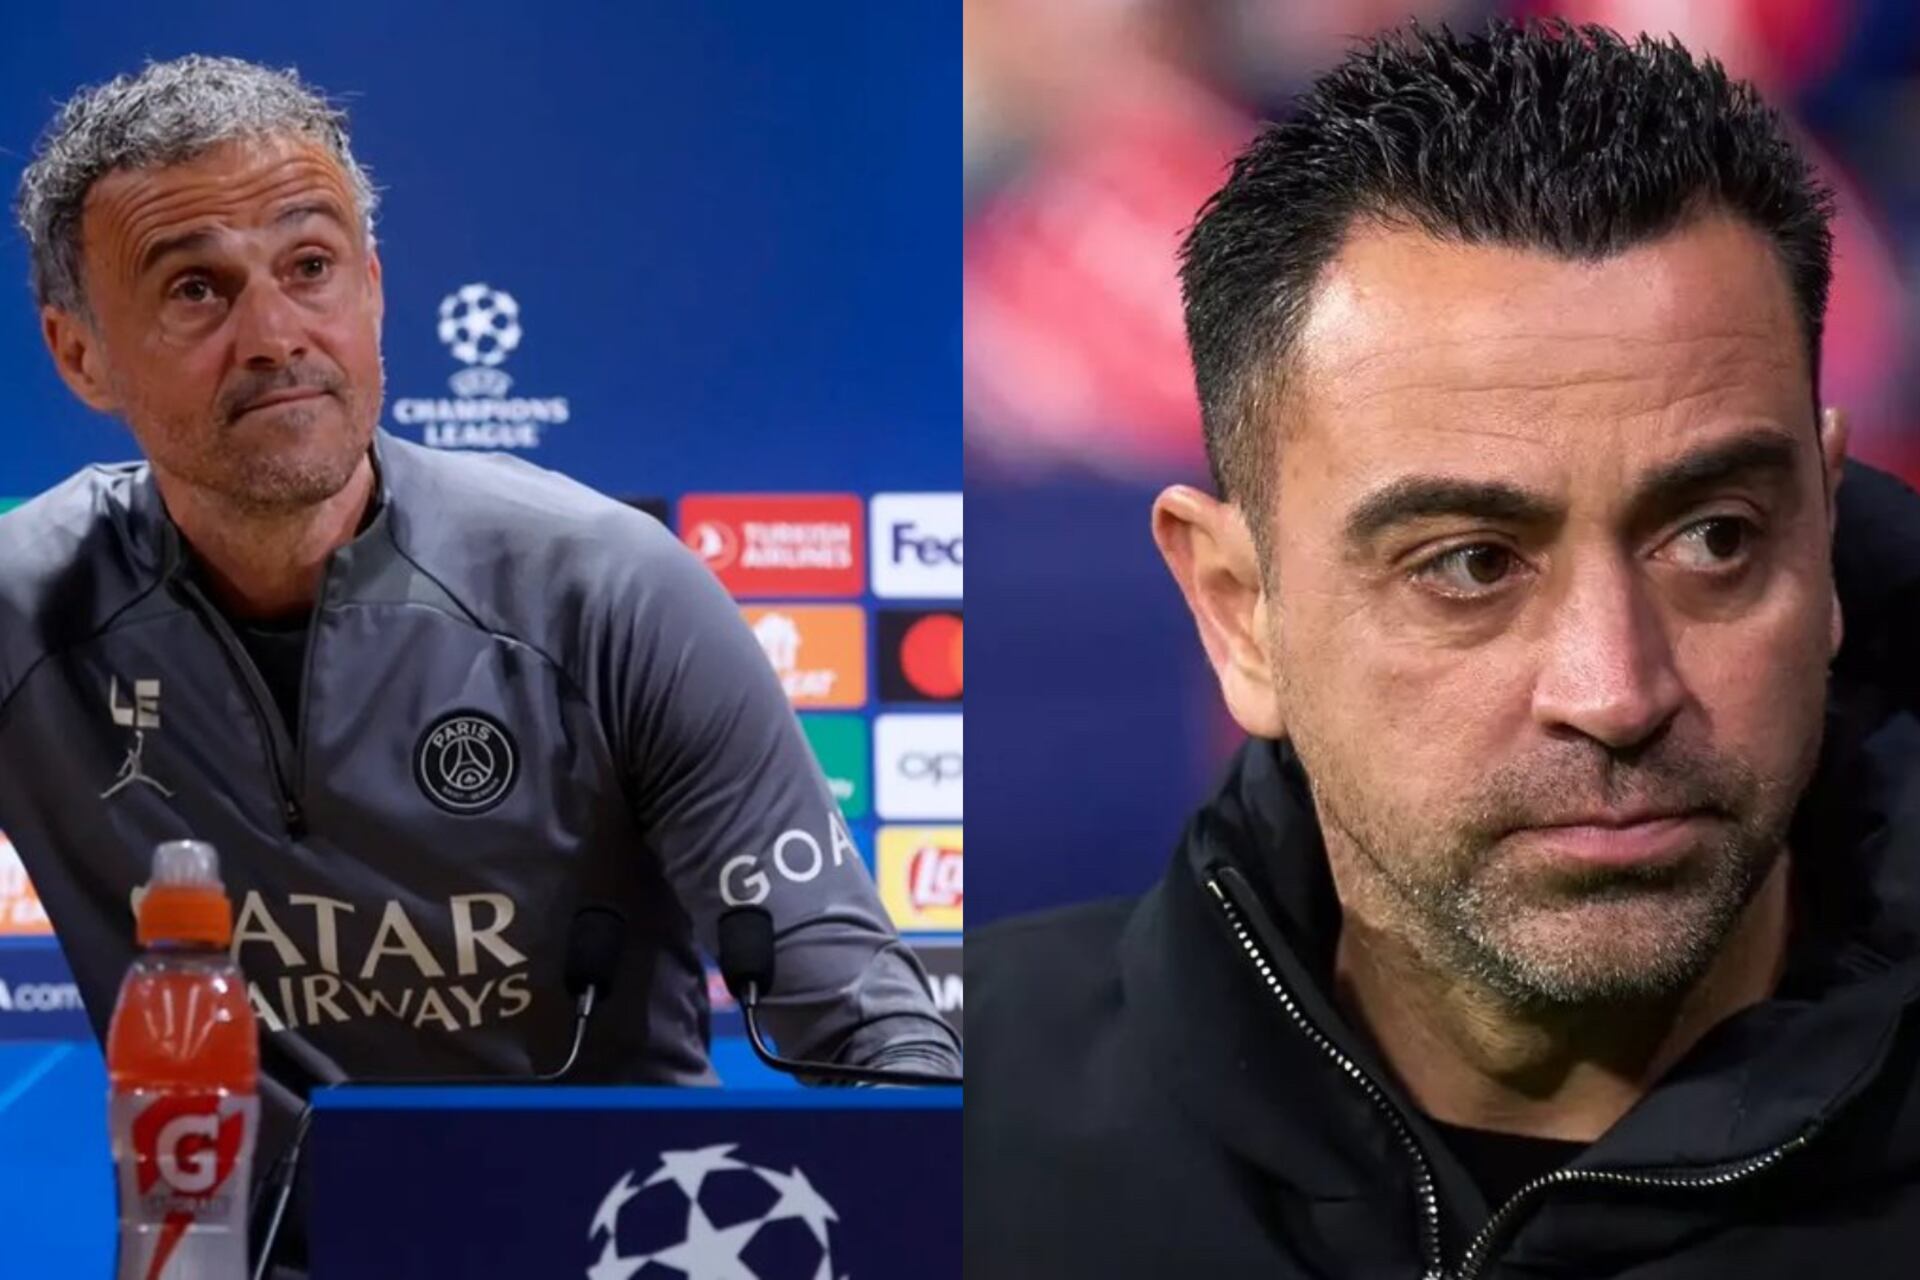 PSG's Enrique makes this controversial comment on him compared to Barca's Xavi